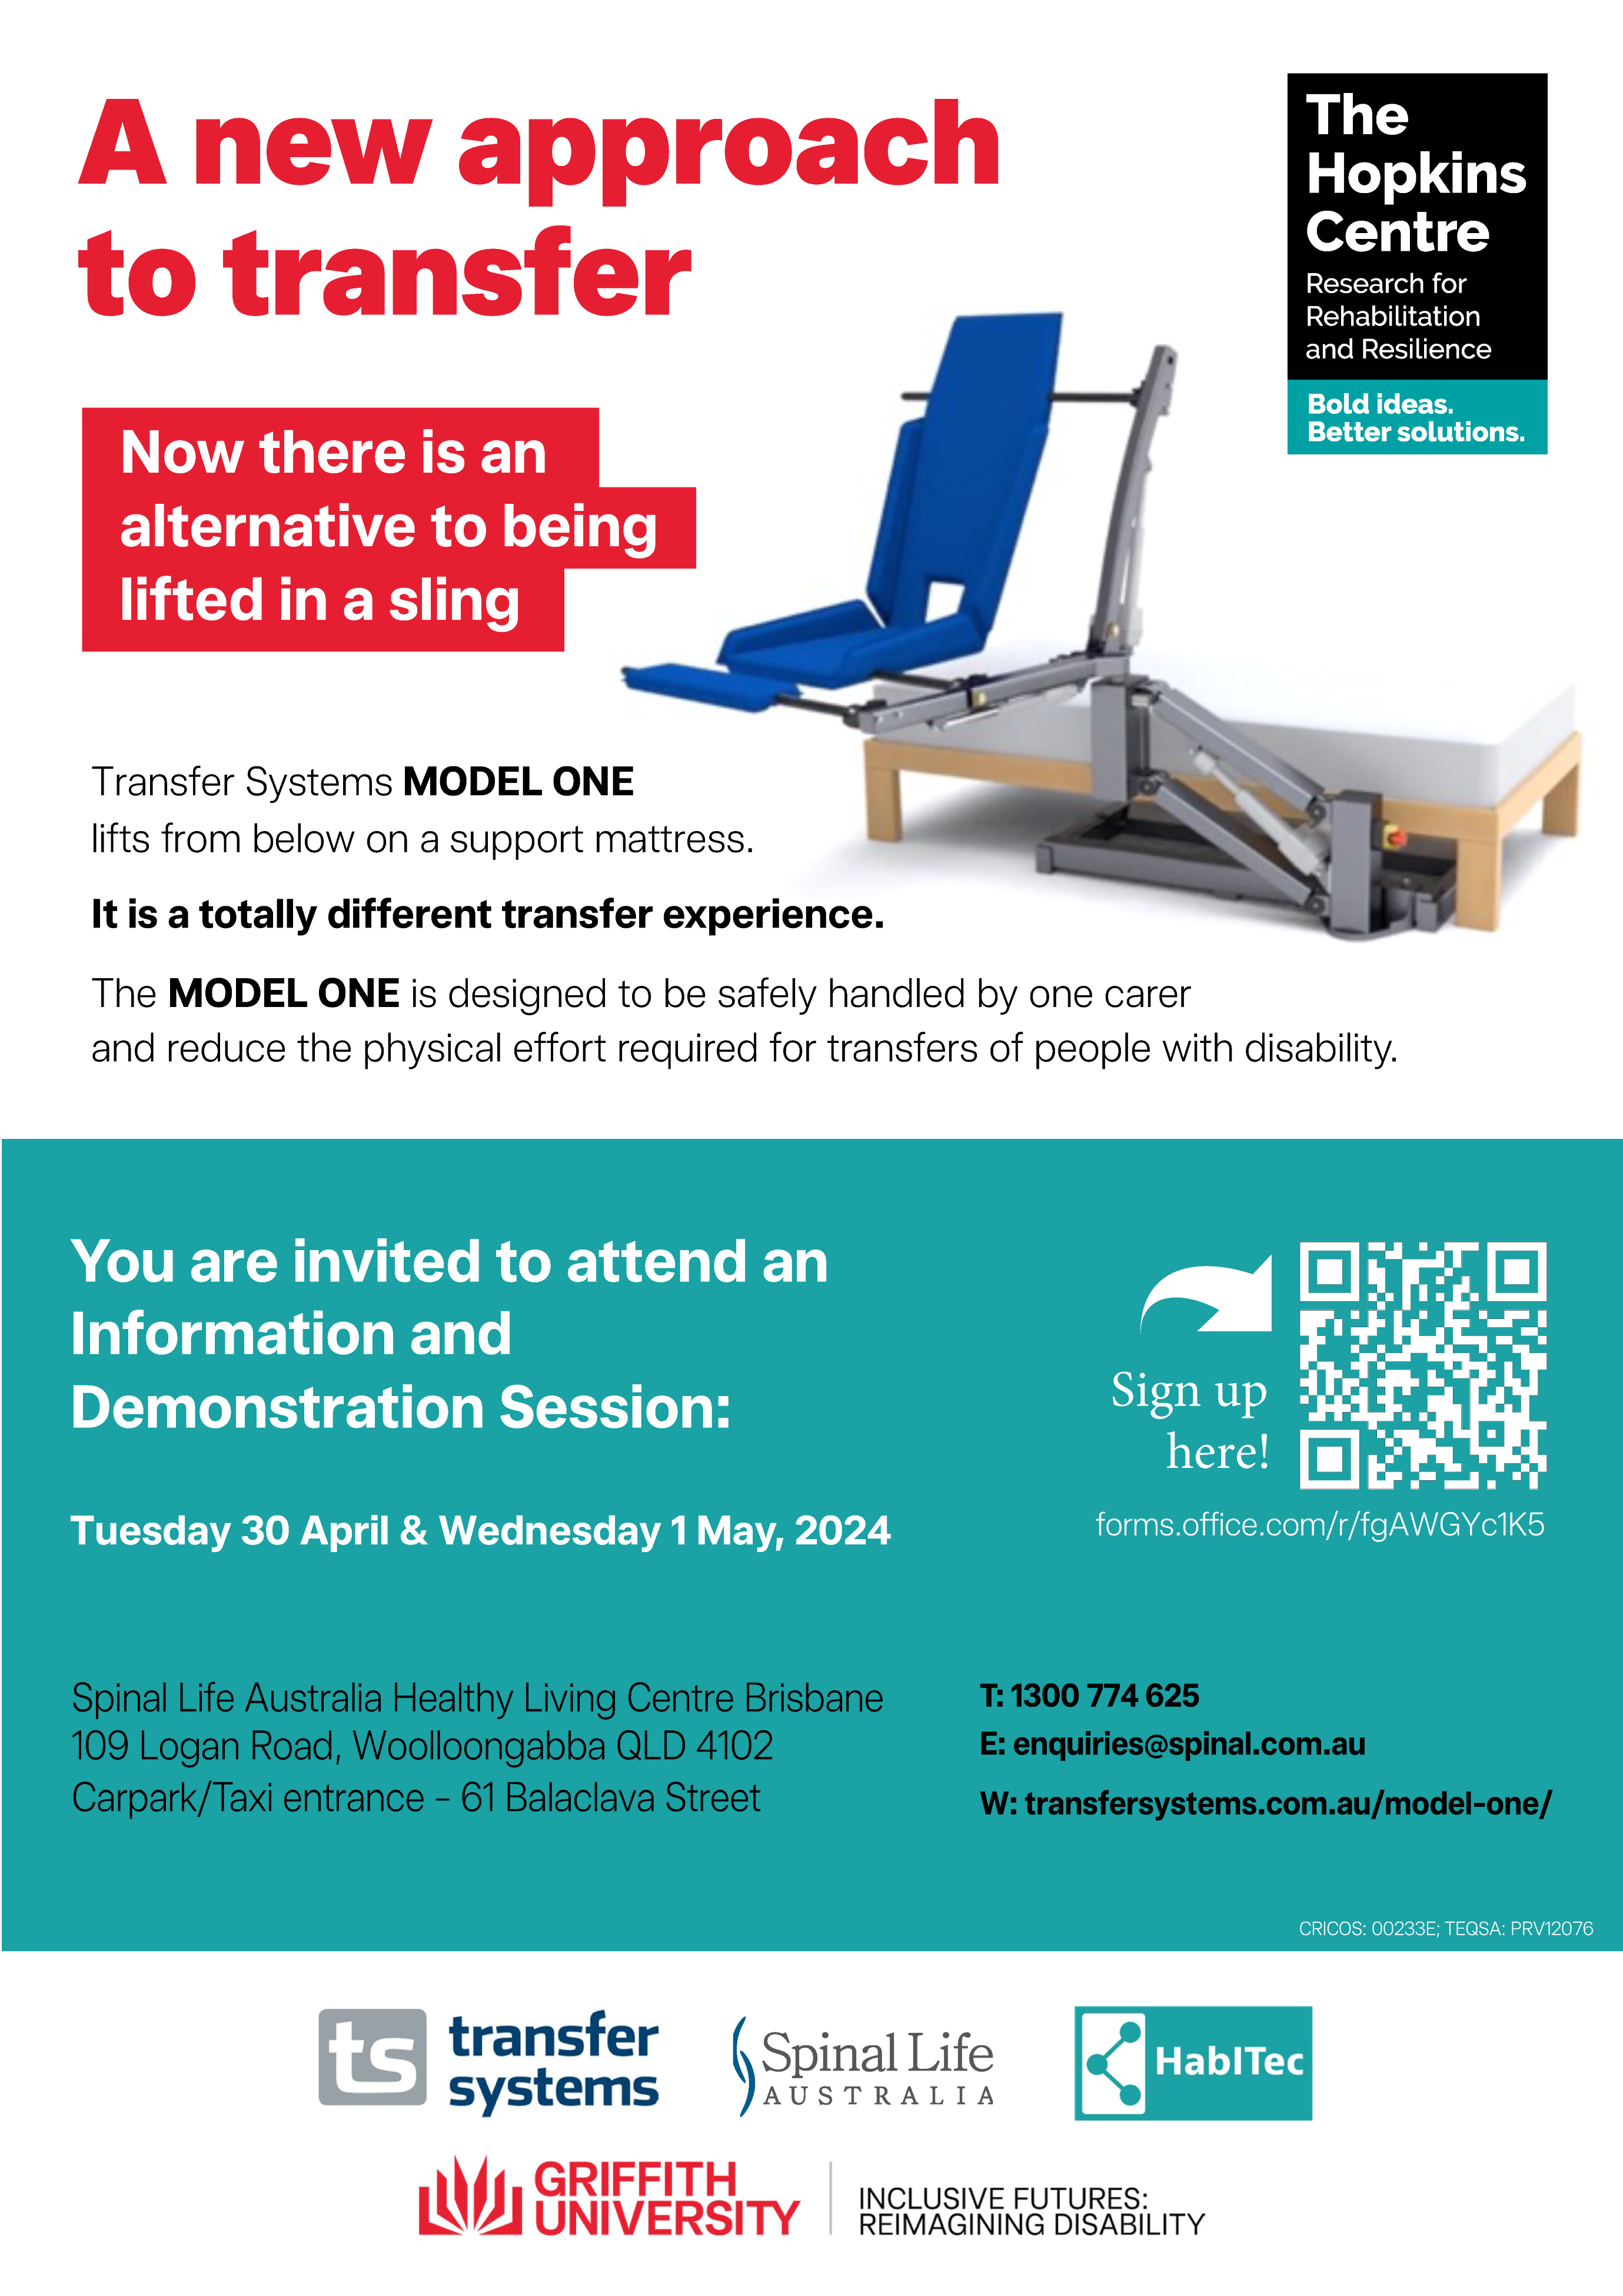 Flyer for information sessions with an image of the Model One, some text, a QR code to the events and the logos of The Hopkins Centre, Griffith University Inclusive Futures: Reimagining Disability, Spinal Life Australia, Transfer Systems and HabITec